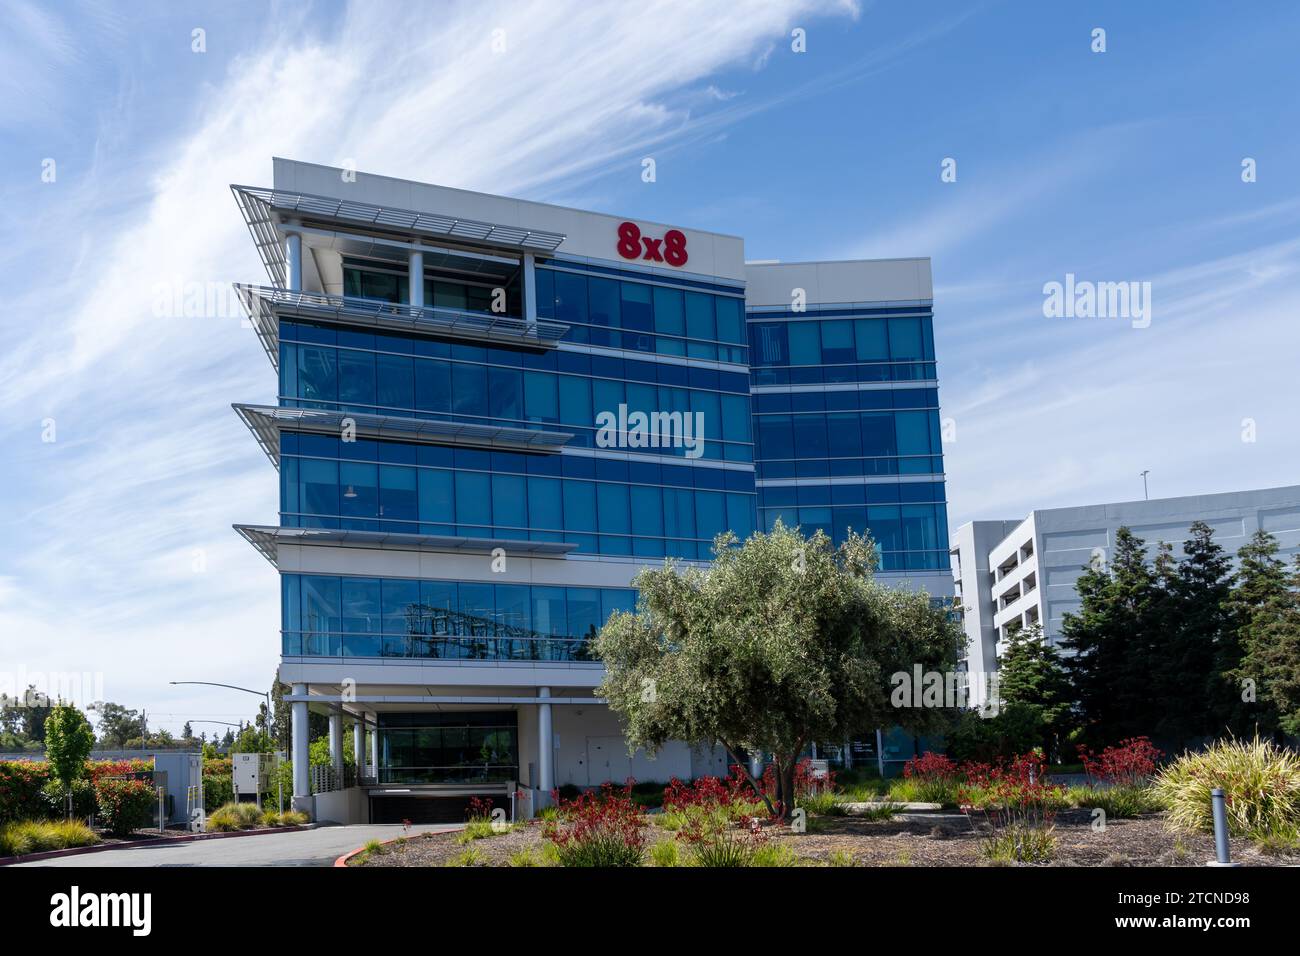 8x8 Inc. headquarters in Campbell, CA, USA Stock Photo